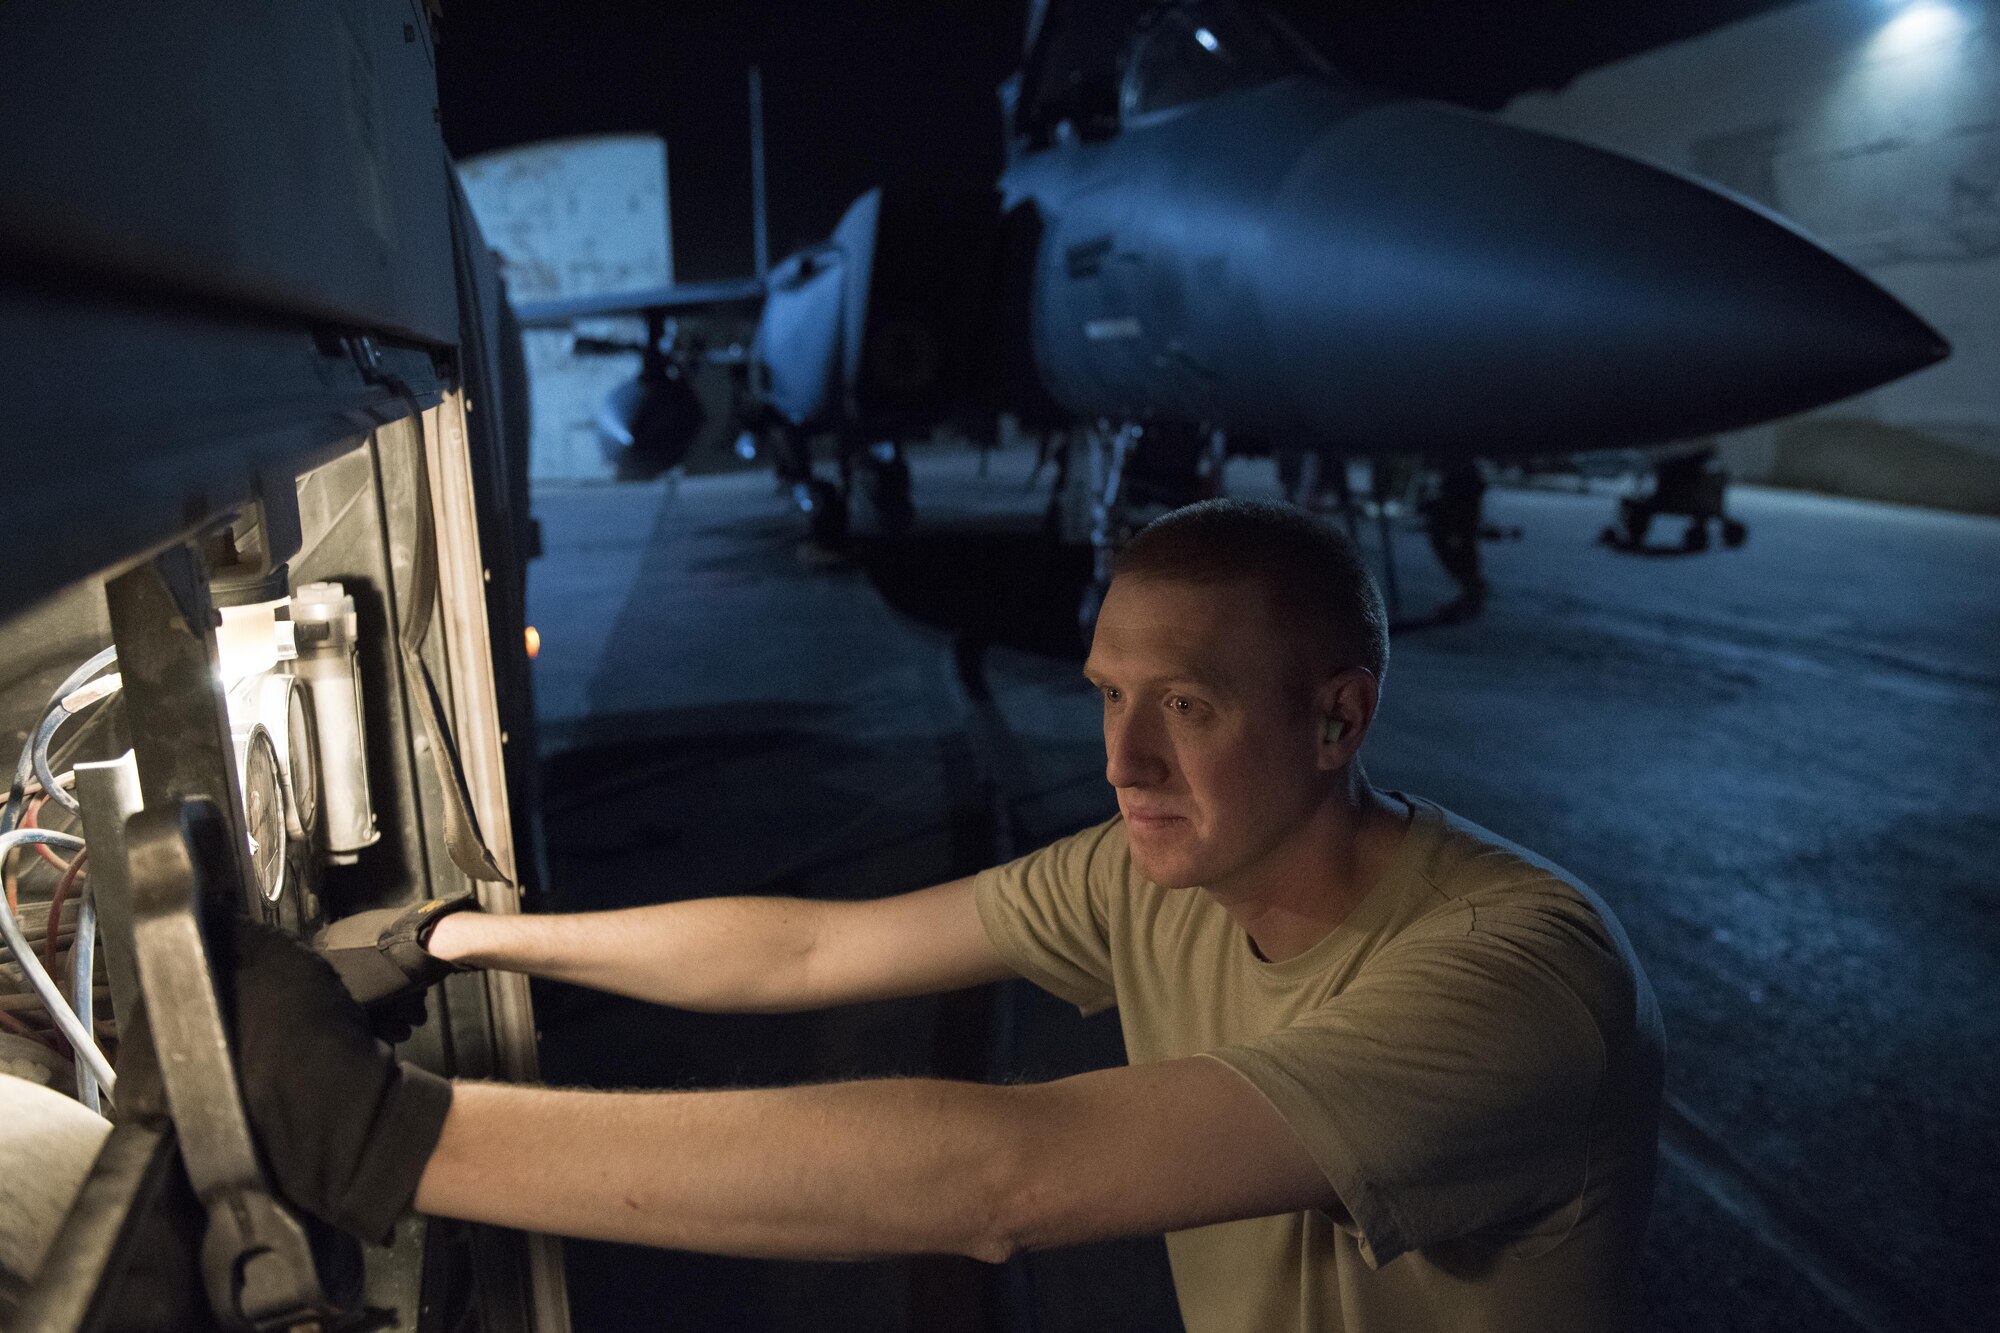 Staff Sgt. Kenneth Zaun, 332nd Expeditionary Logistics Readiness Squadron fuels flight controller, pumps fuel into a F-15E Strike Eagle, July 22, 2017 in Southwest Asia. The fuels flight operates a 24-hour shift, doing their part to ensure aircraft are mission ready. (U.S. Air Force photo/Senior Airman Damon Kasberg)